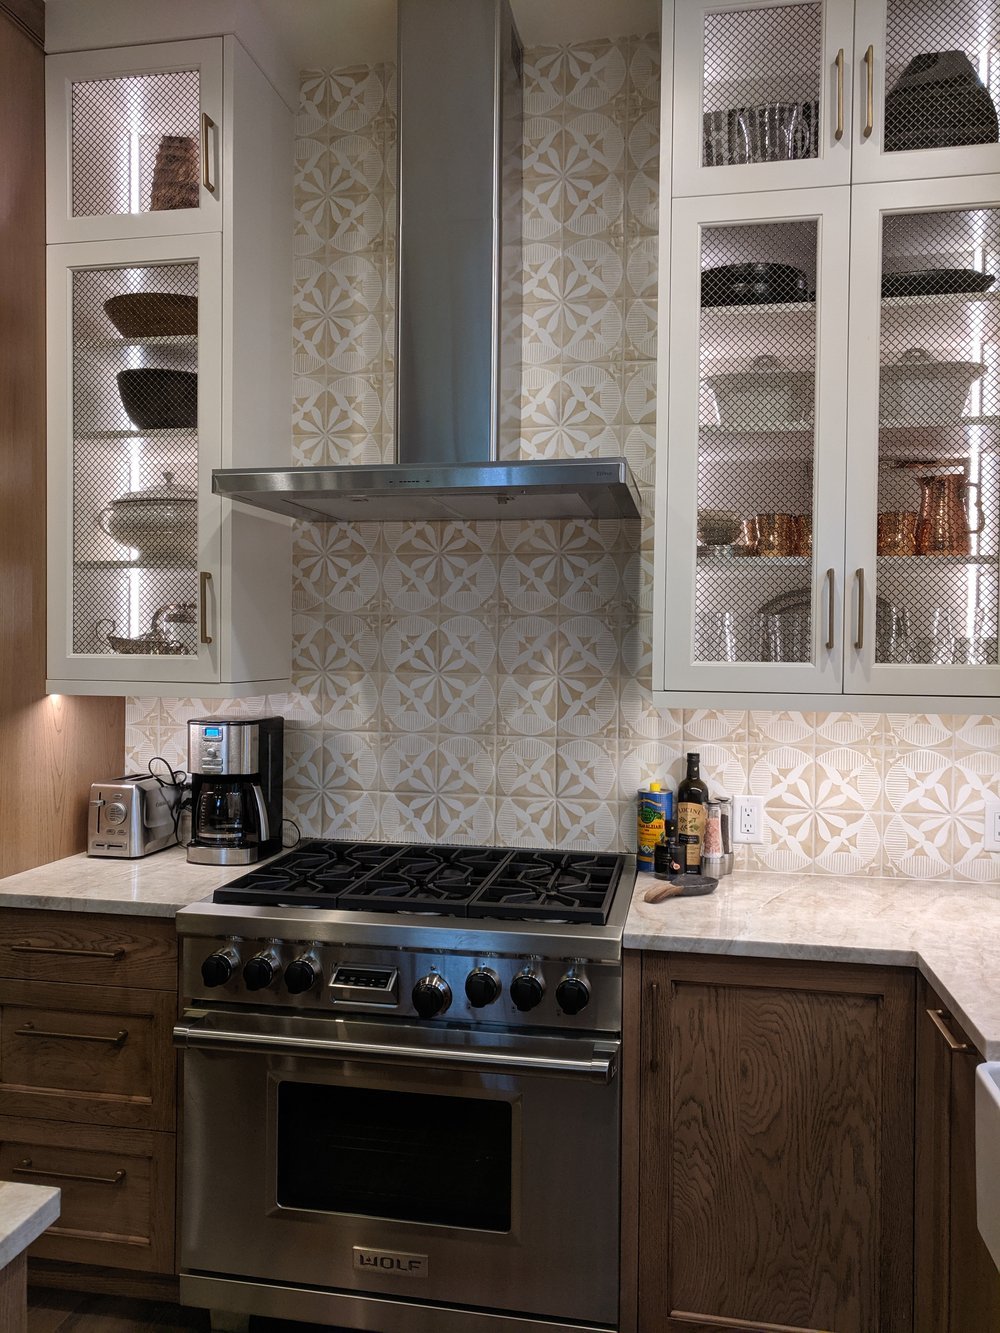 Vail Kitchen Cabinetry and Appliances by Kitchenscapes.jpg